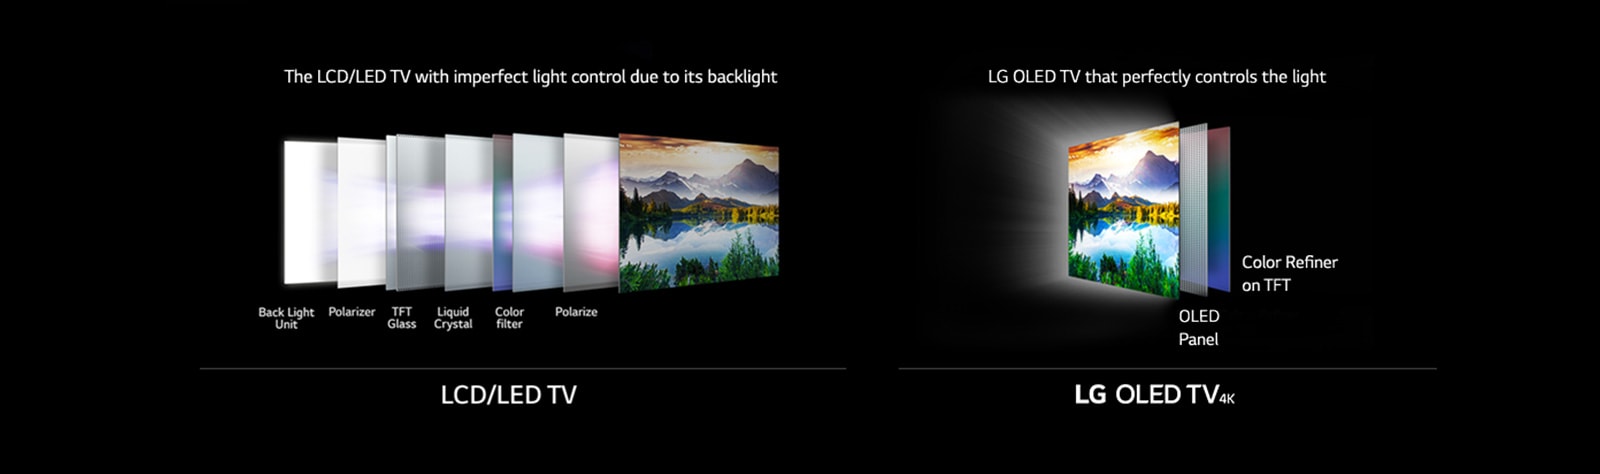 LCD/LED TV-The LCD/LED TV with imperfect light control due to its backlight, Back light Unit, Polarizer, TFT Glass, Liquid Crystal, Color filter, Polarize. LG OLED TV 4K: LG OLED TV that perfectly controls the light, Color Refiner on TFT - OLED Panel